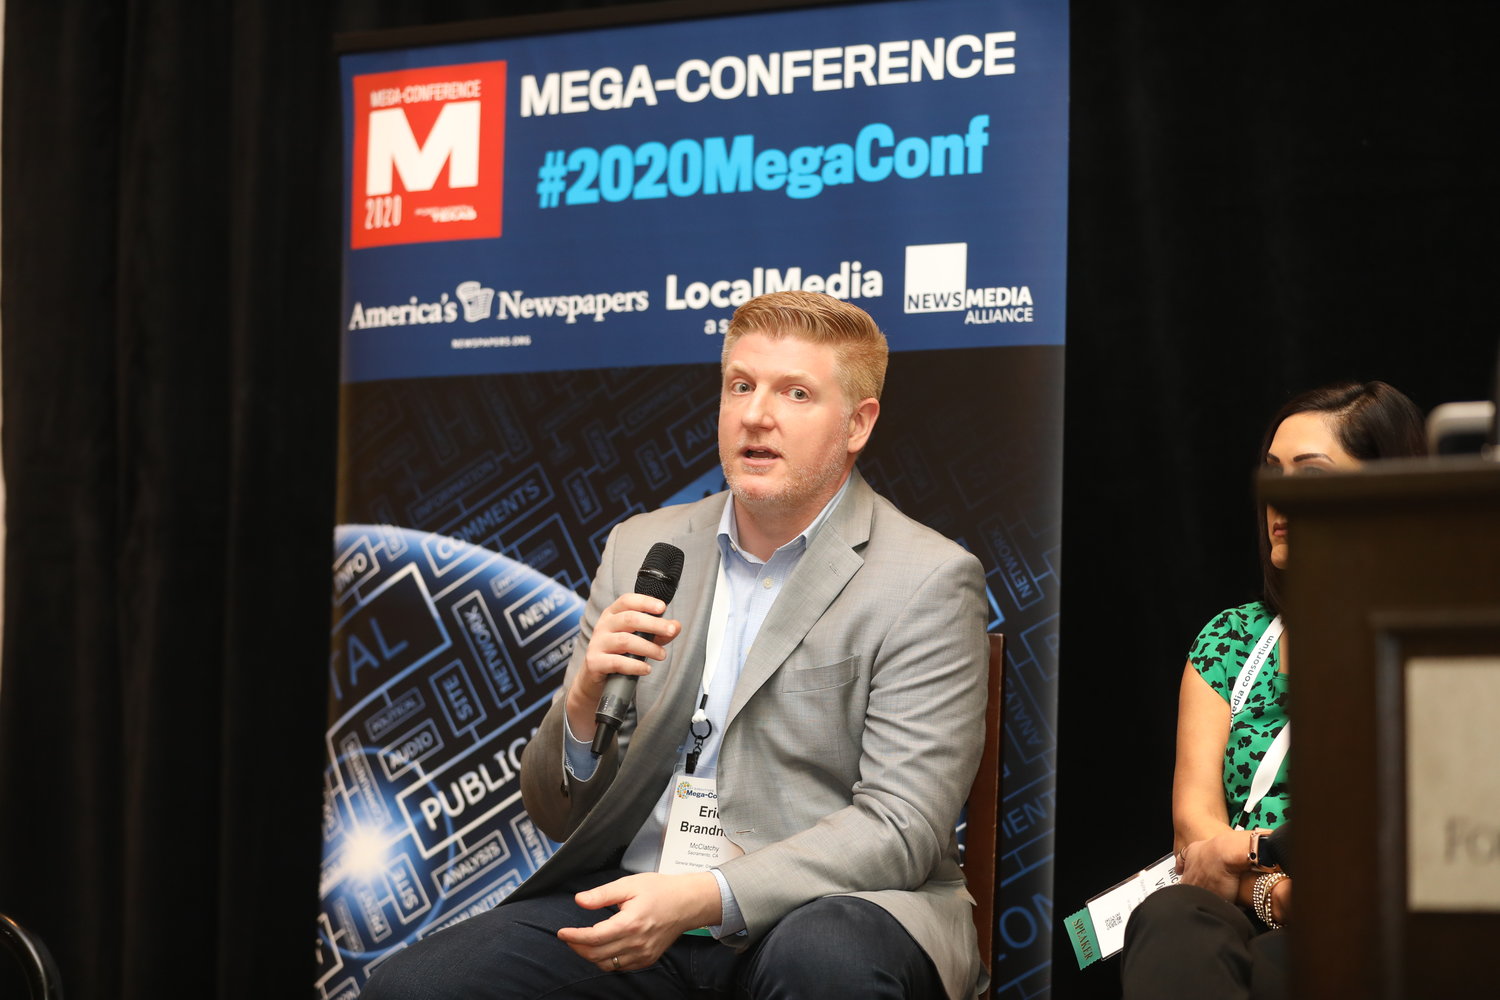 Eric Brandner at the 2020 Mega-Conference. (Photo by Bob Booth)